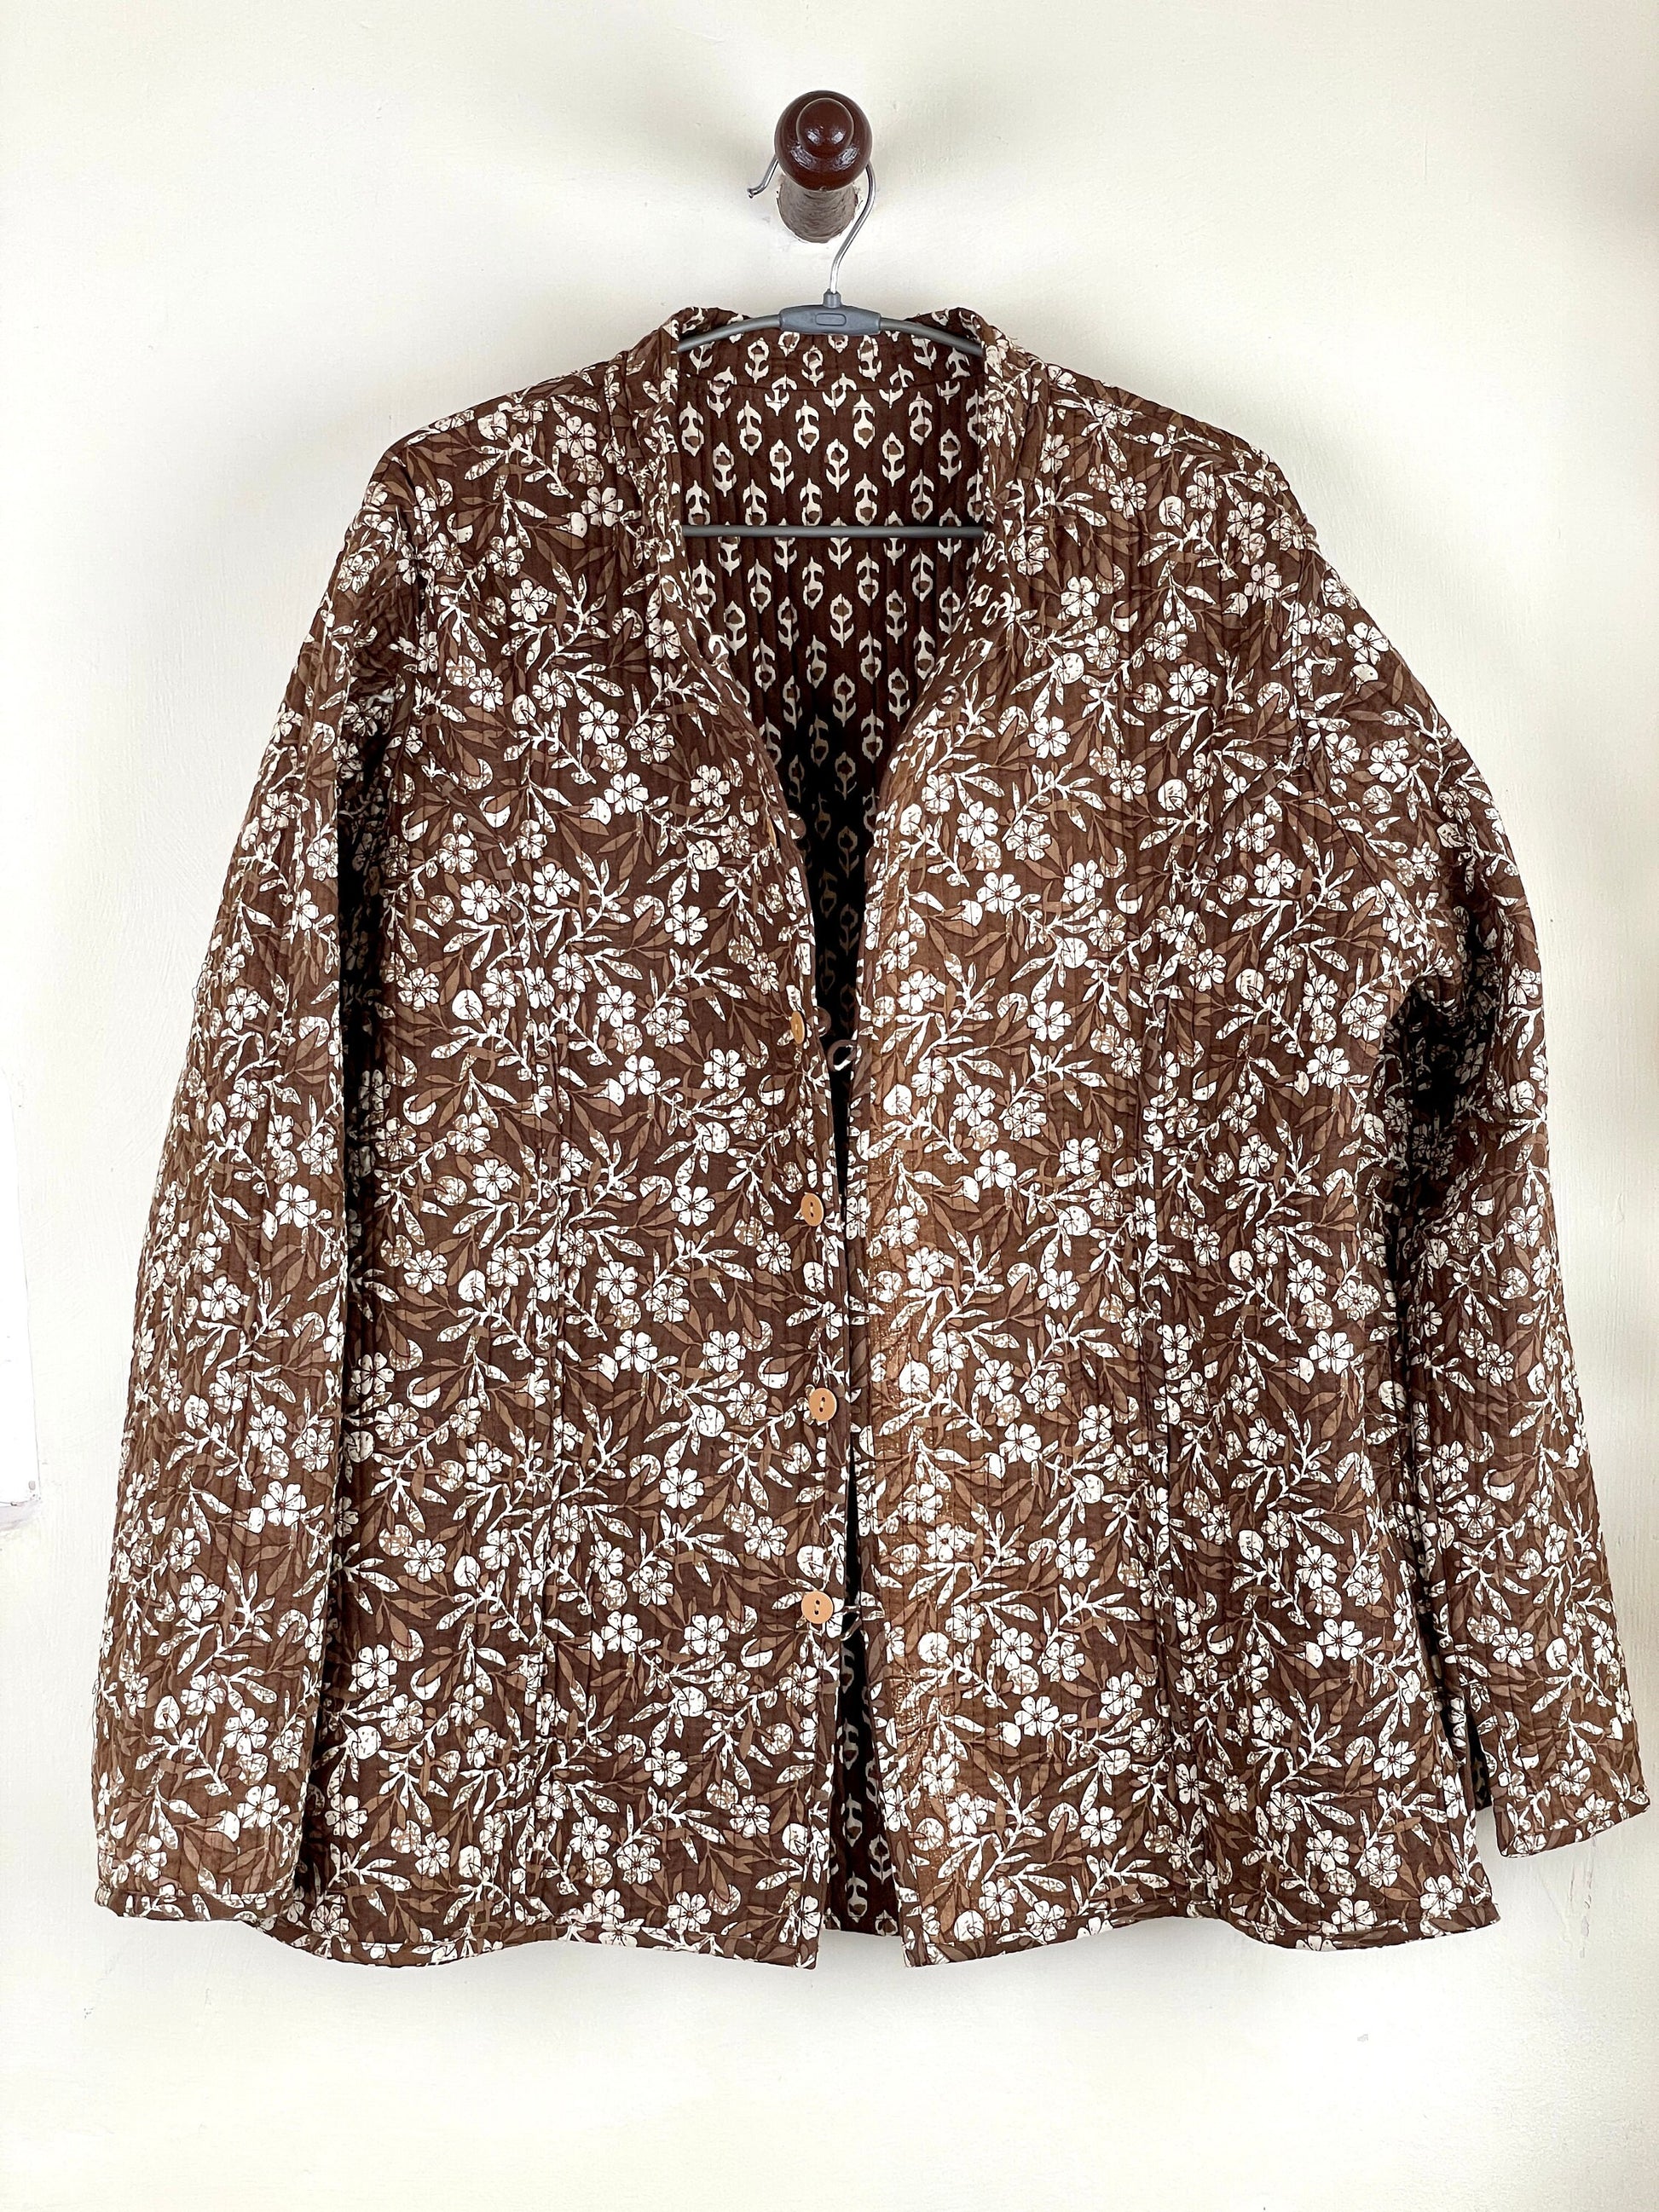 Indian Handmade Quilted Cotton Fabric Jacket Stylish Brown & White Floral Women's Coat, Reversible Waistcoat, Christmas Gift for Her